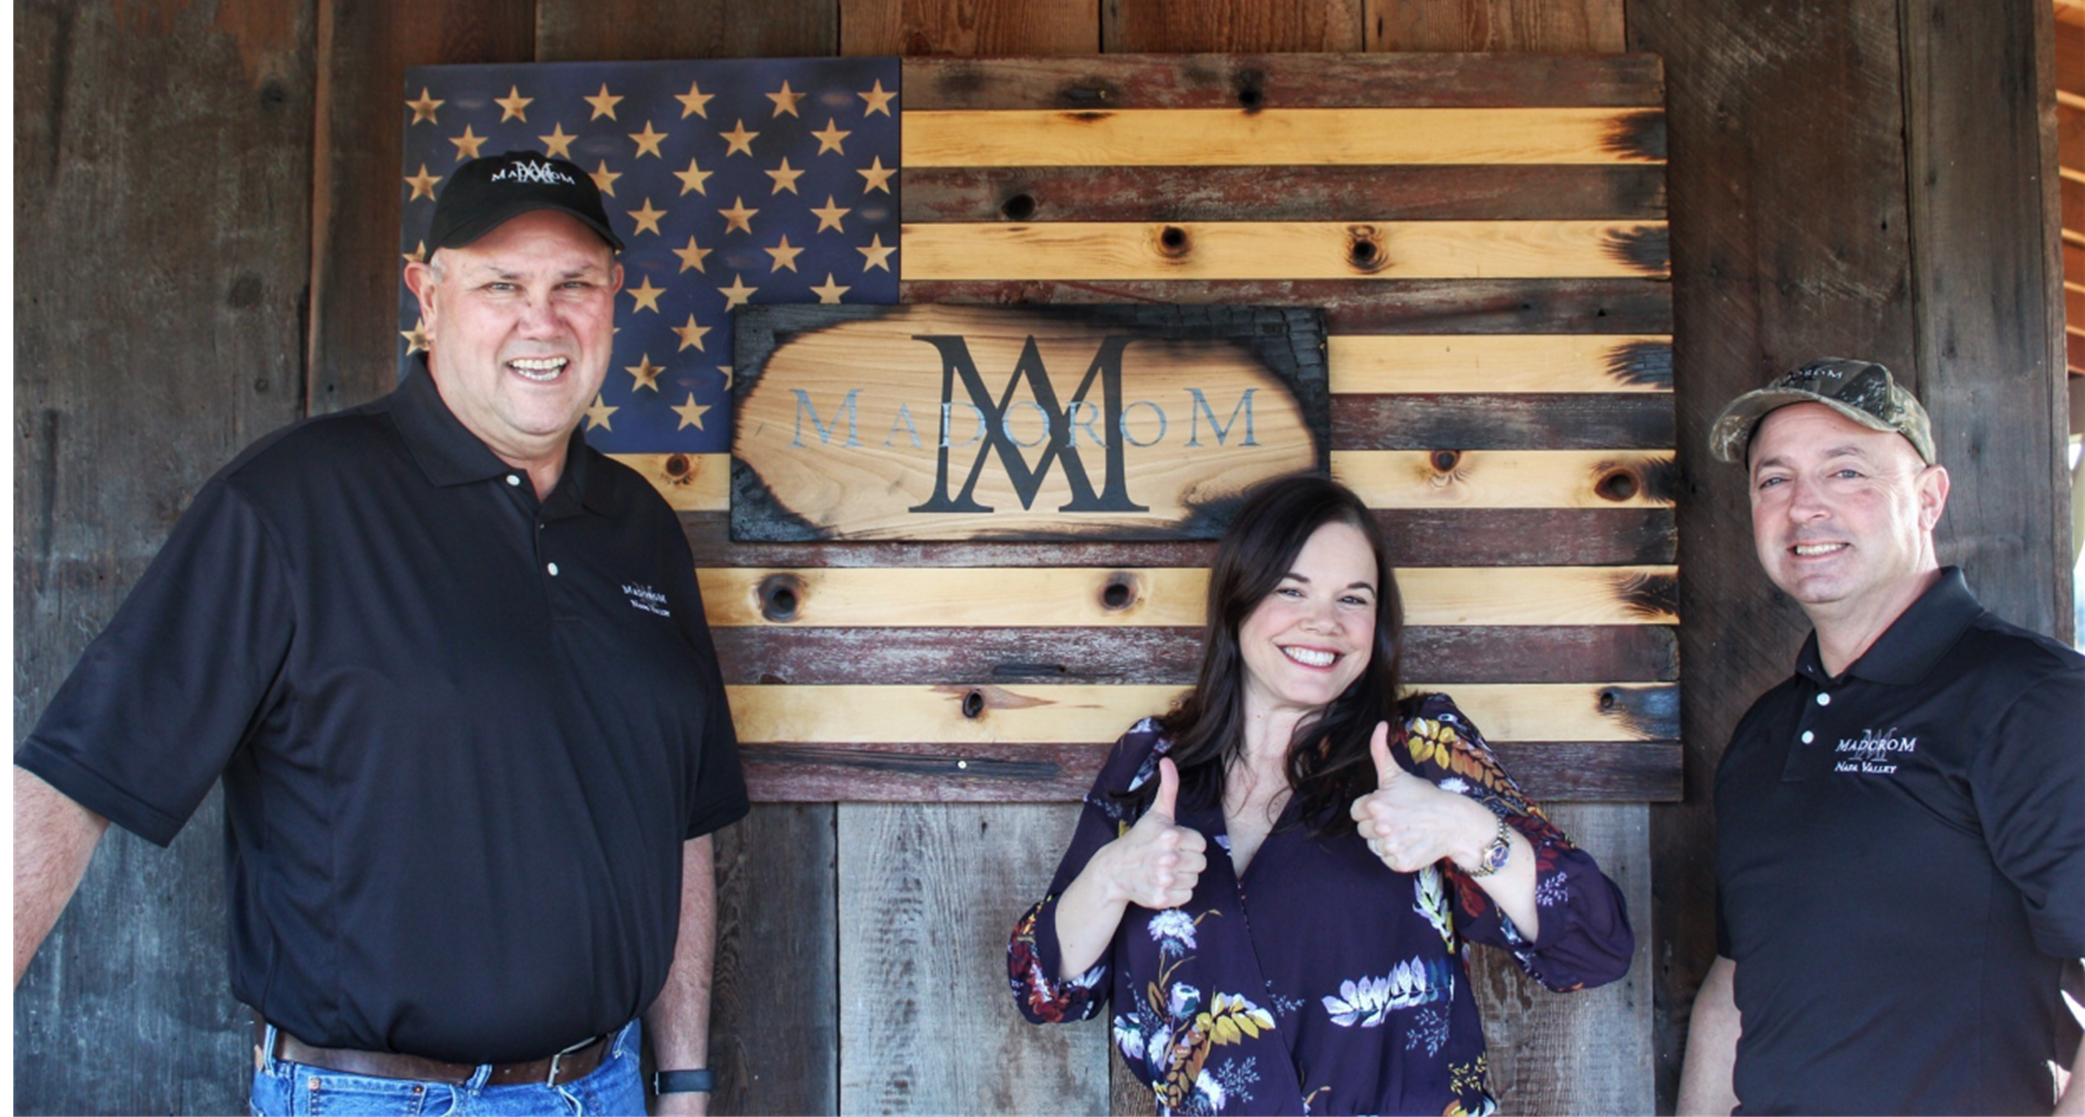 Andy & Marissa welcome you to MadoroM Vineyards